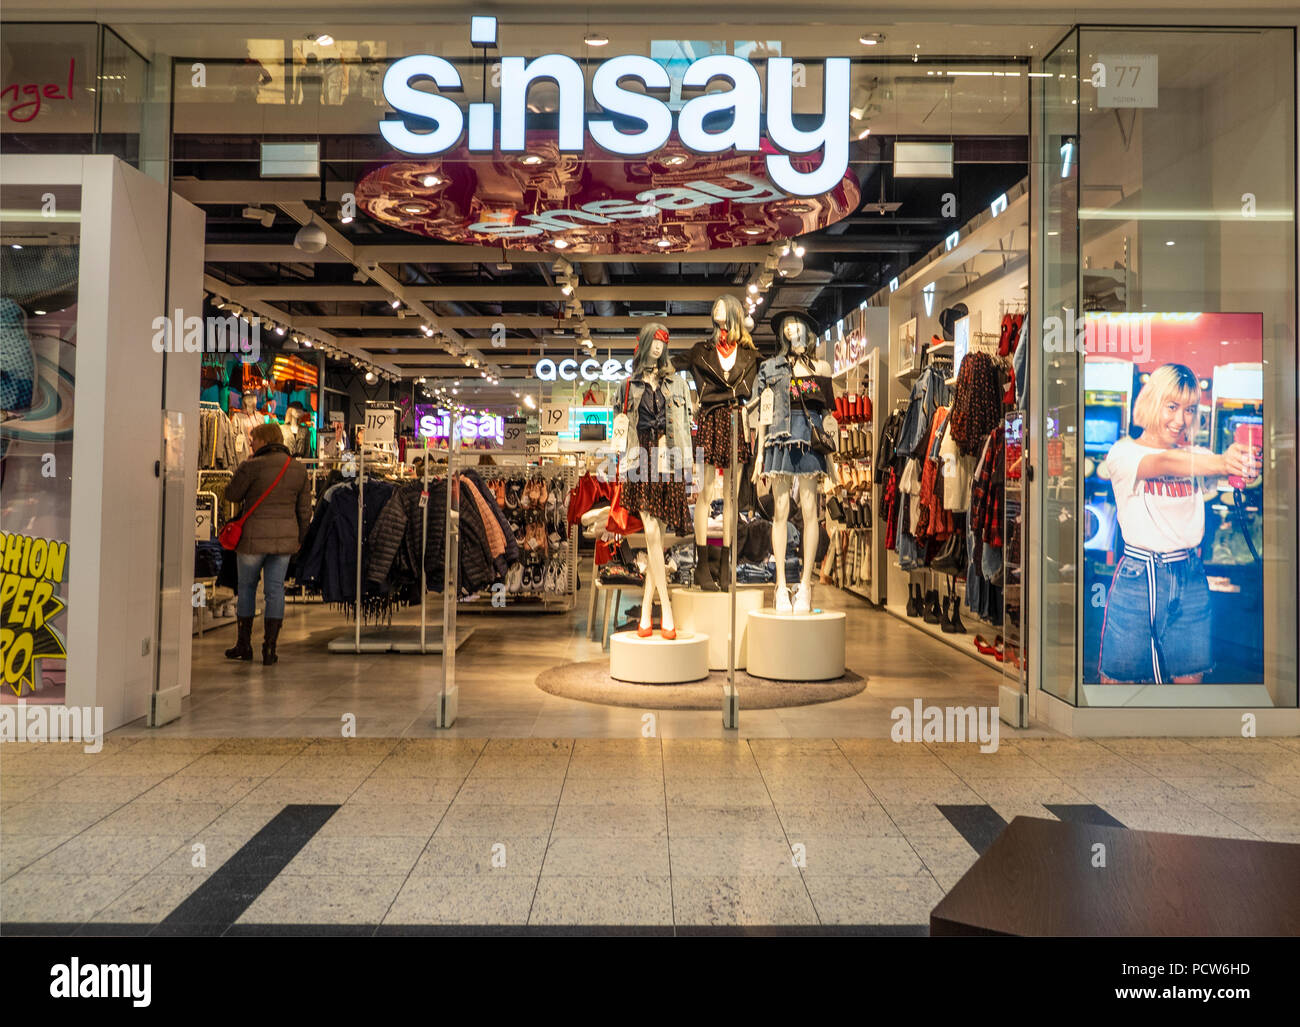 Sinsay store in Galeria Krakowska. Sinsay is one of brands of LPP S. A.  (Lubianiec Piechocki and Partnerzy) is a large Polish retailing company  based in Gdansk whose brands include: Reserved, Reserved